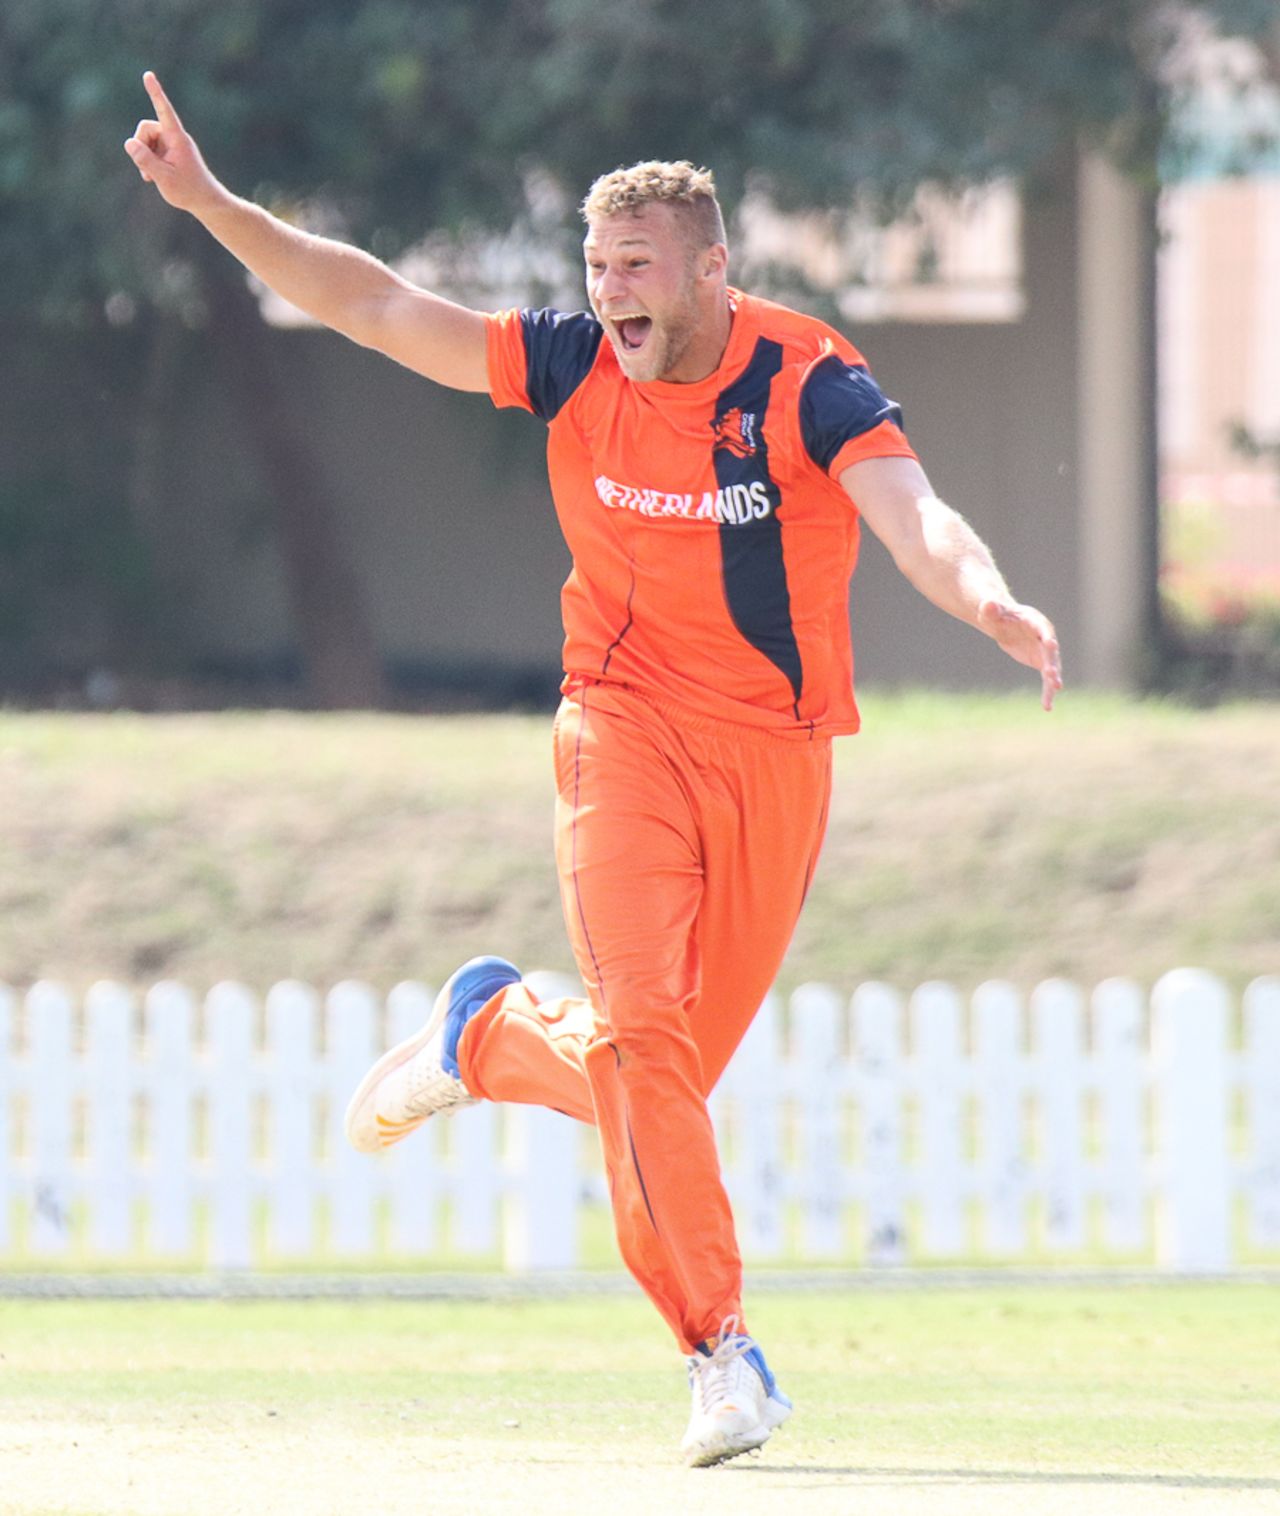 Vivian Kingma belts out a successful lbw appeal to complete a hat-trick, Namibia v Netherlands, 2015-17 WCL Championship, Dubai, December 8, 2017